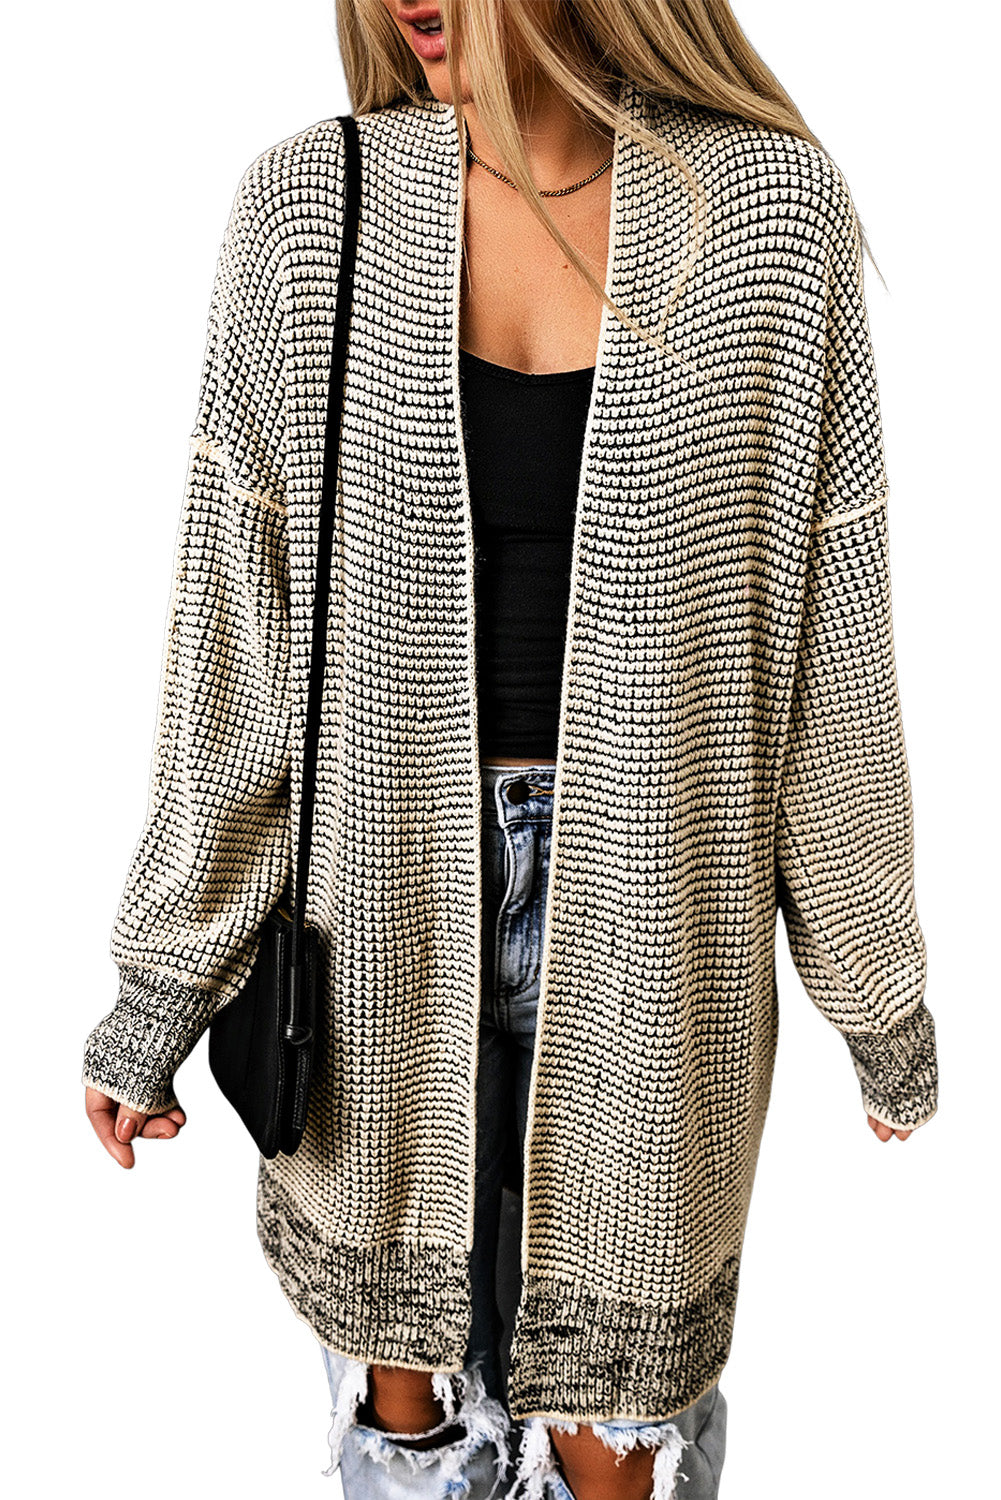 Apricot Plaid Knitted Long Open Front Cardigan Sweaters & Cardigans JT's Designer Fashion